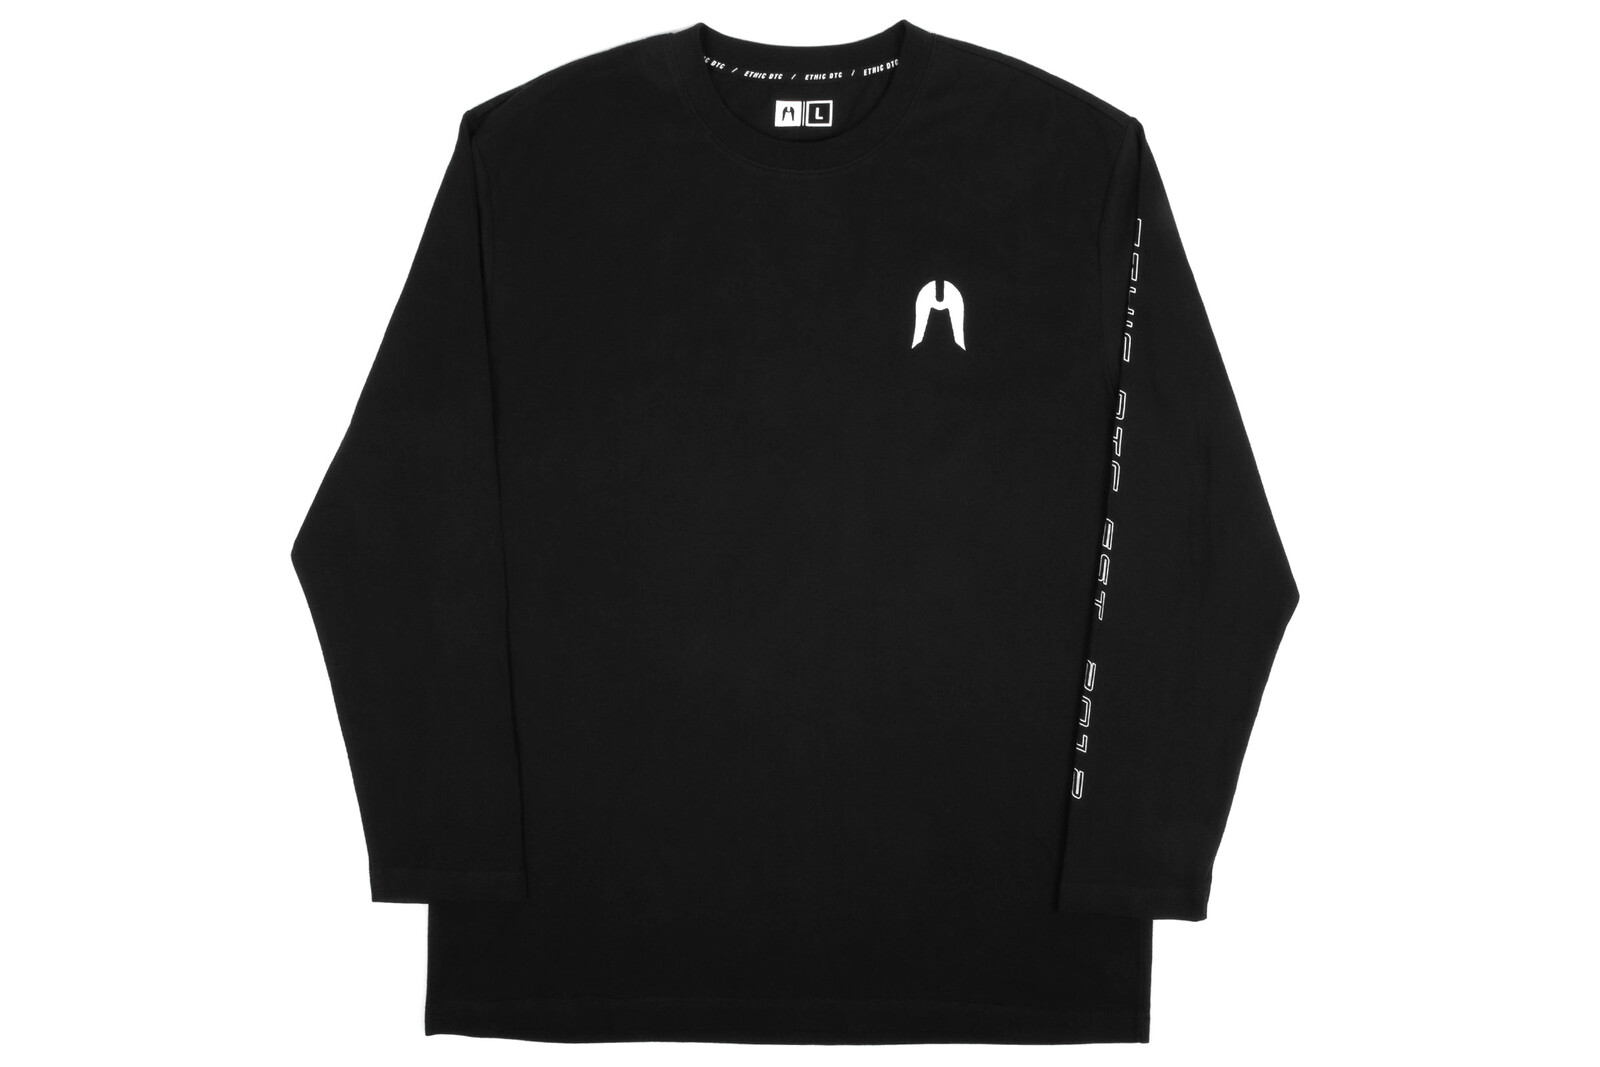 ETHIC DTC – Lost Highway Long Sleeve